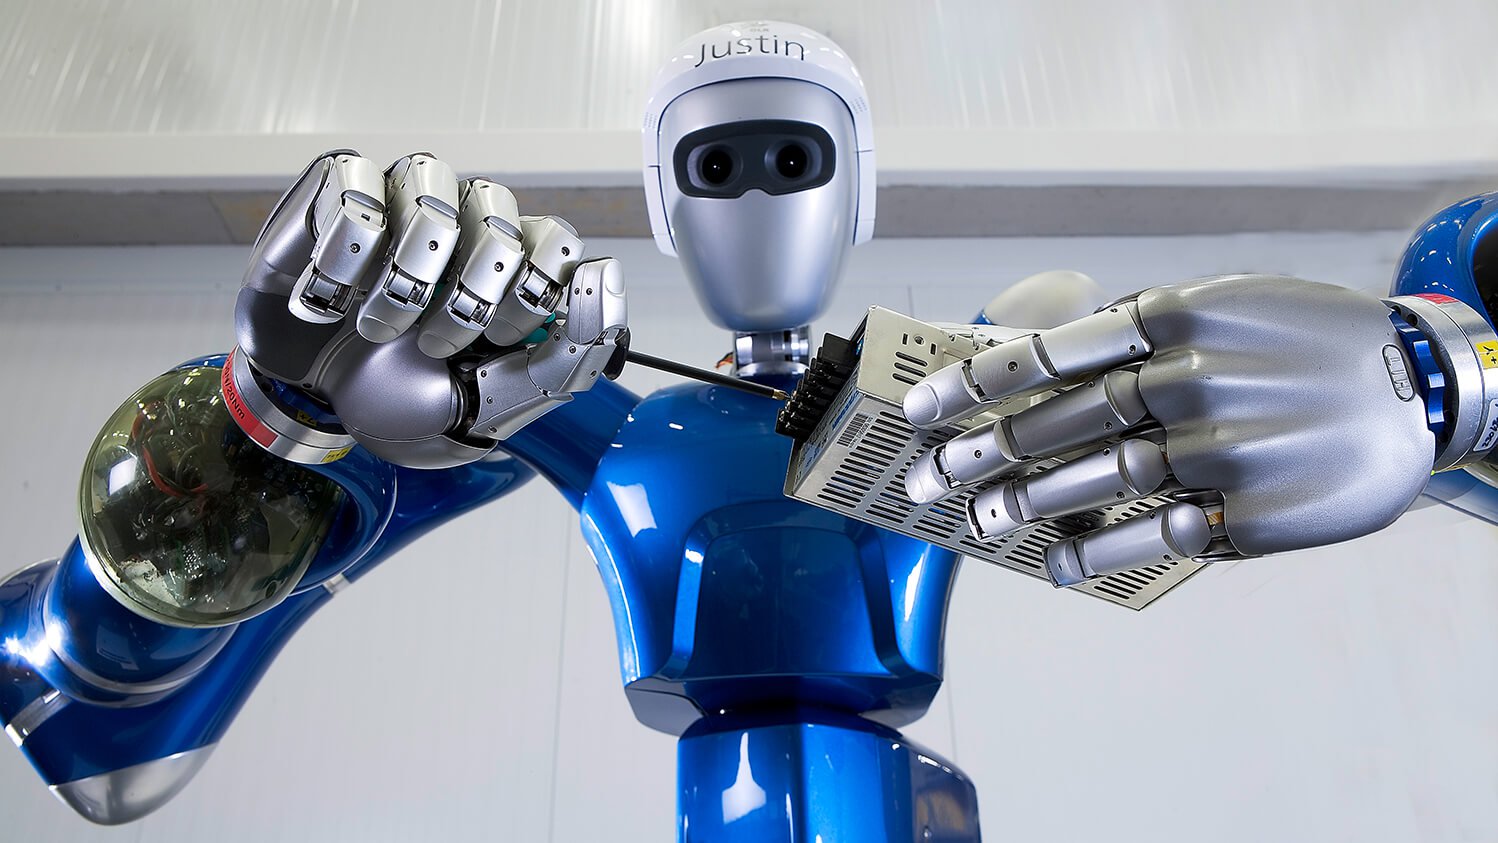 What is an anthropomorphic robot, and why is their popularity growing?